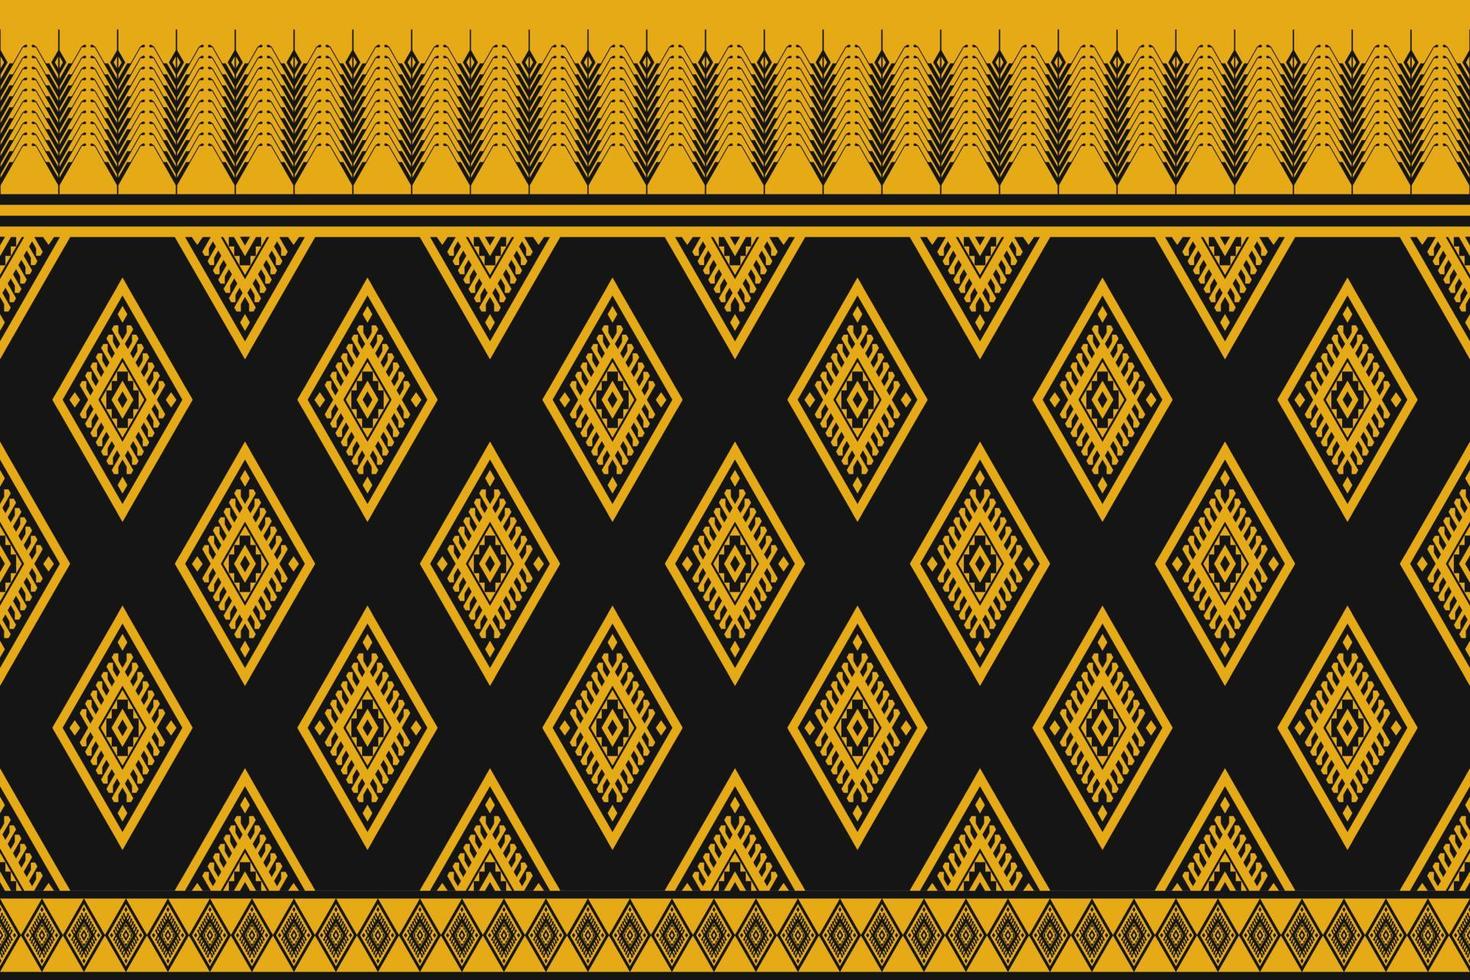 Ethnic abstract yellow pattern art. Seamless pattern in tribal, folk embroidery, and Mexican style. Geometric striped. Design for background, wallpaper, vector illustration, fabric, clothing, carpet